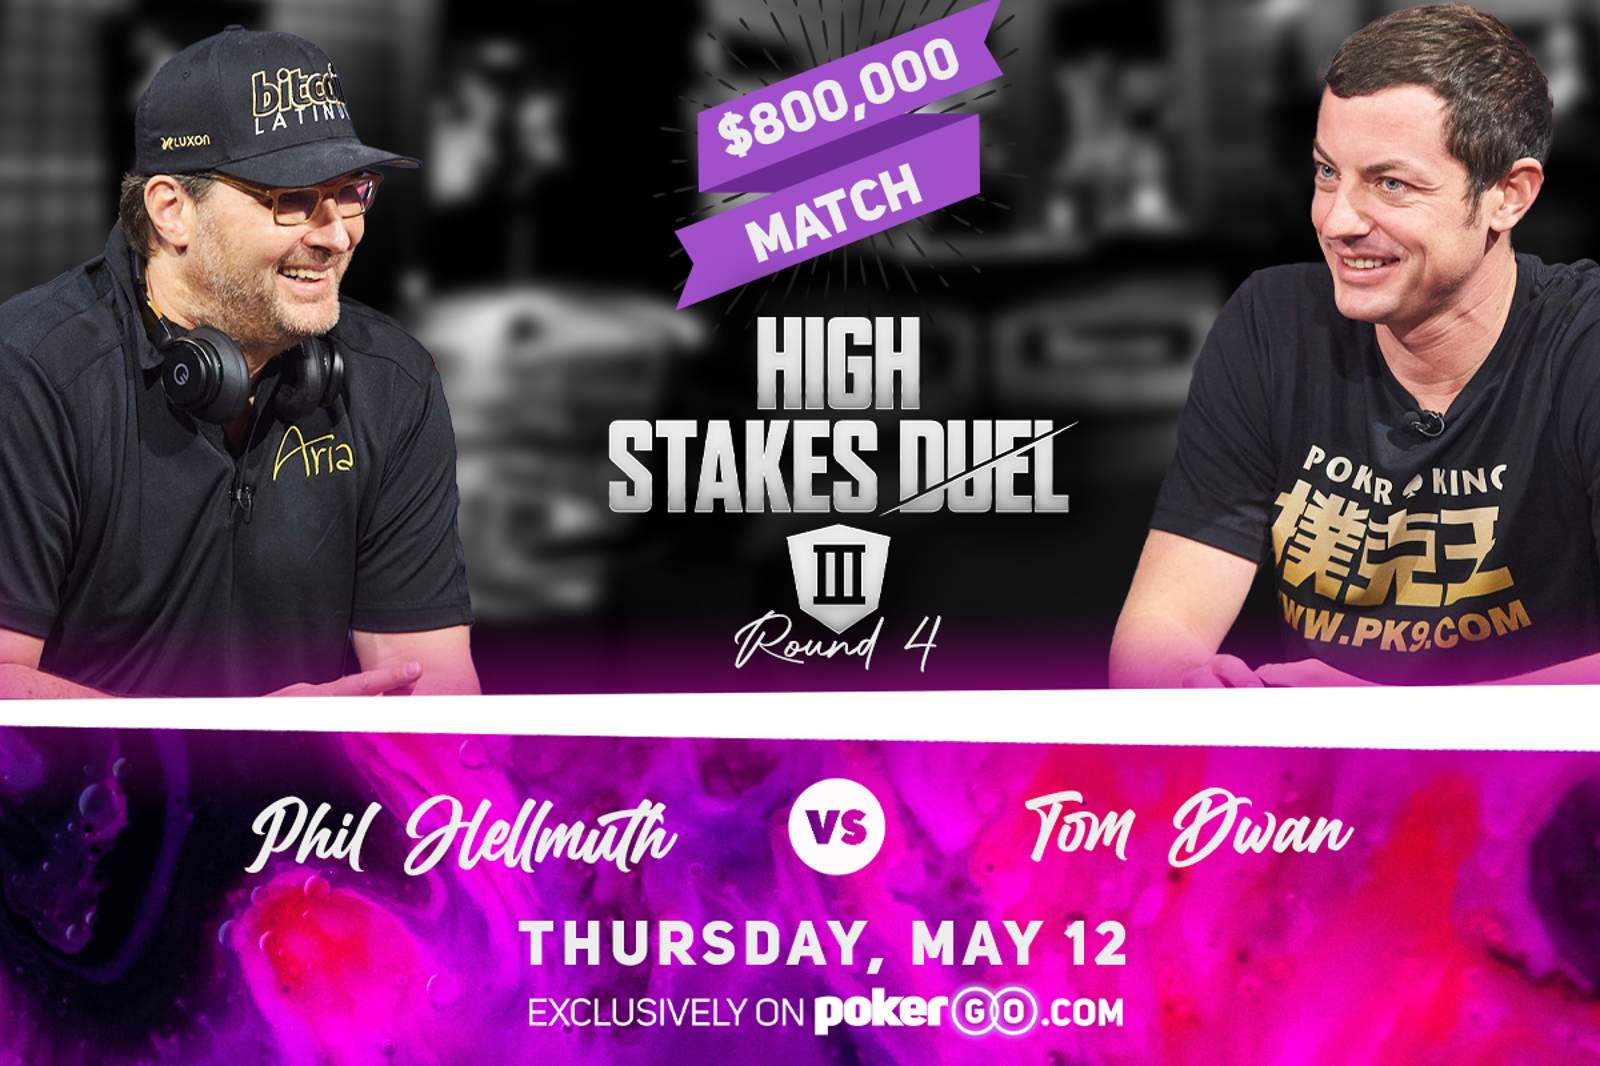 Phil Hellmuth and Tom Dwan Battle for $800,000 On PokerGO®'s 'High Stakes Duel' On May 12